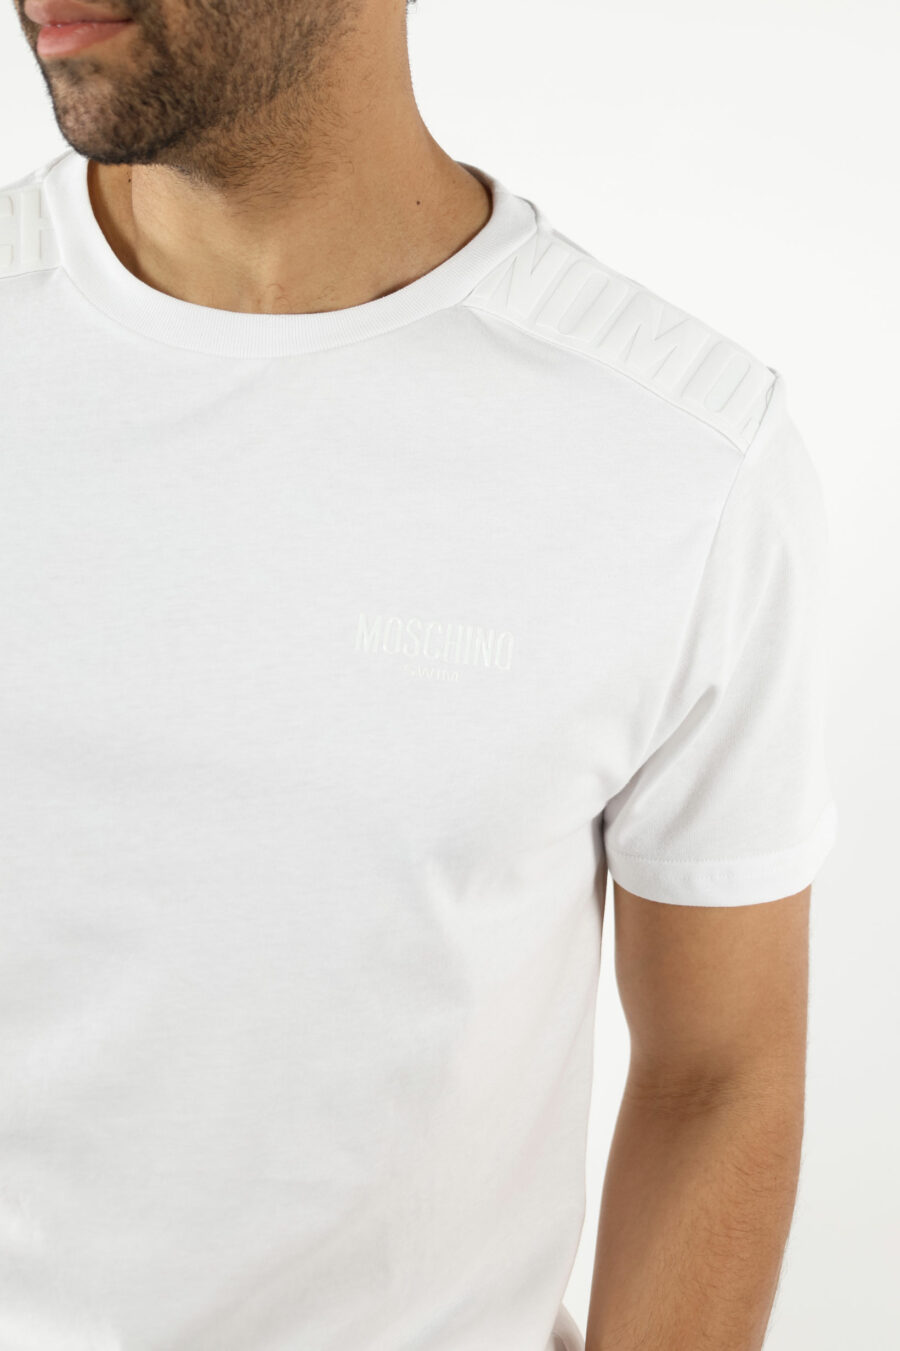 White T-shirt with monochrome rubber logo on shoulders - 111079